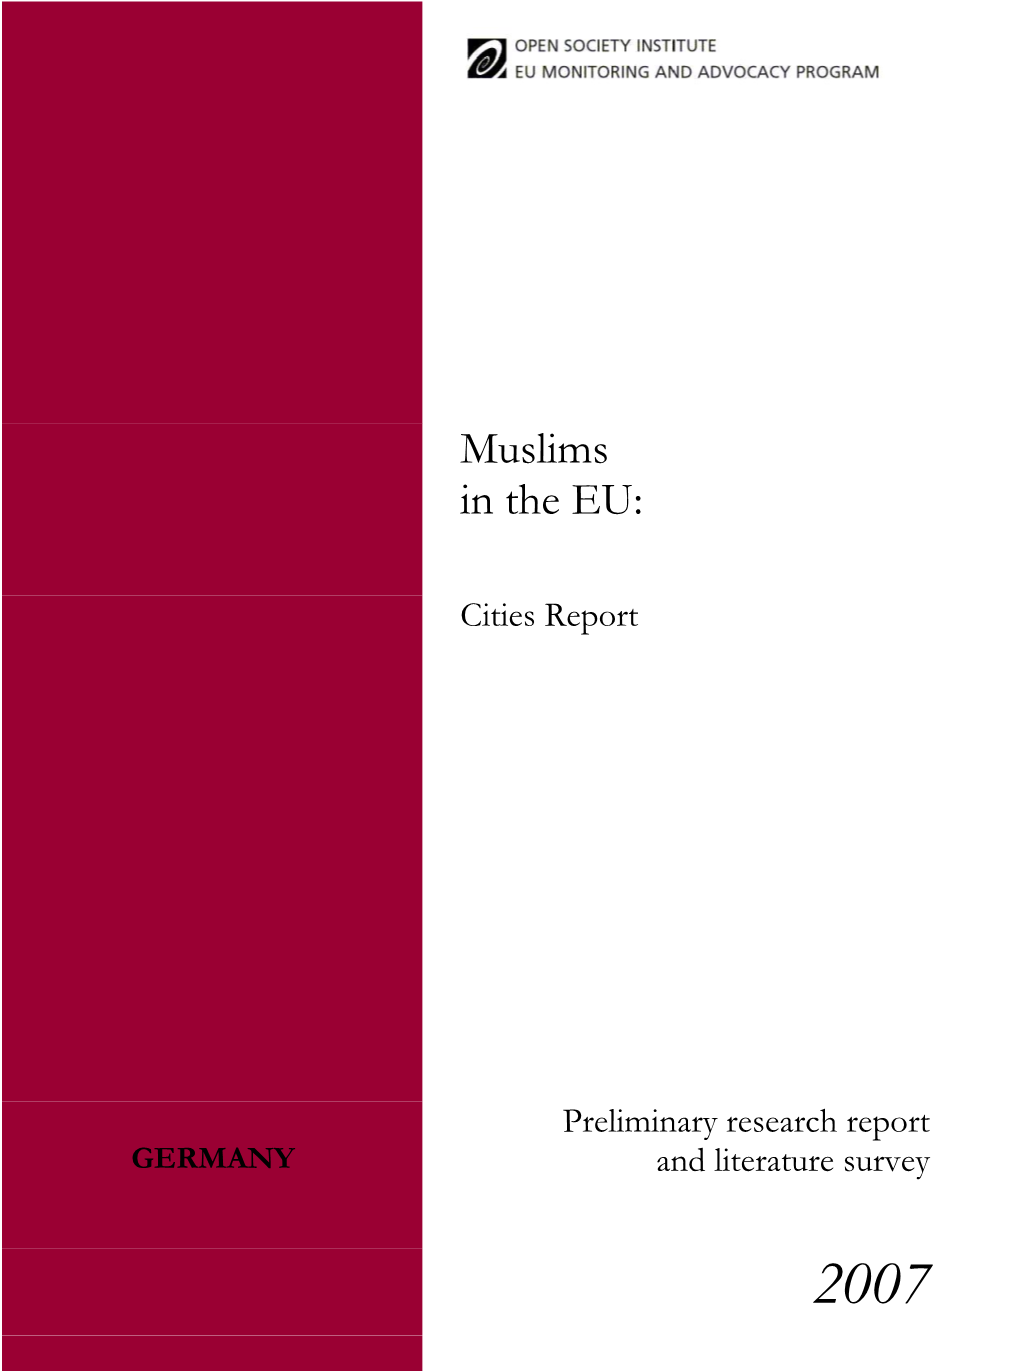 Germany | Muslims in the EU: Cities Report; Preliminary Research